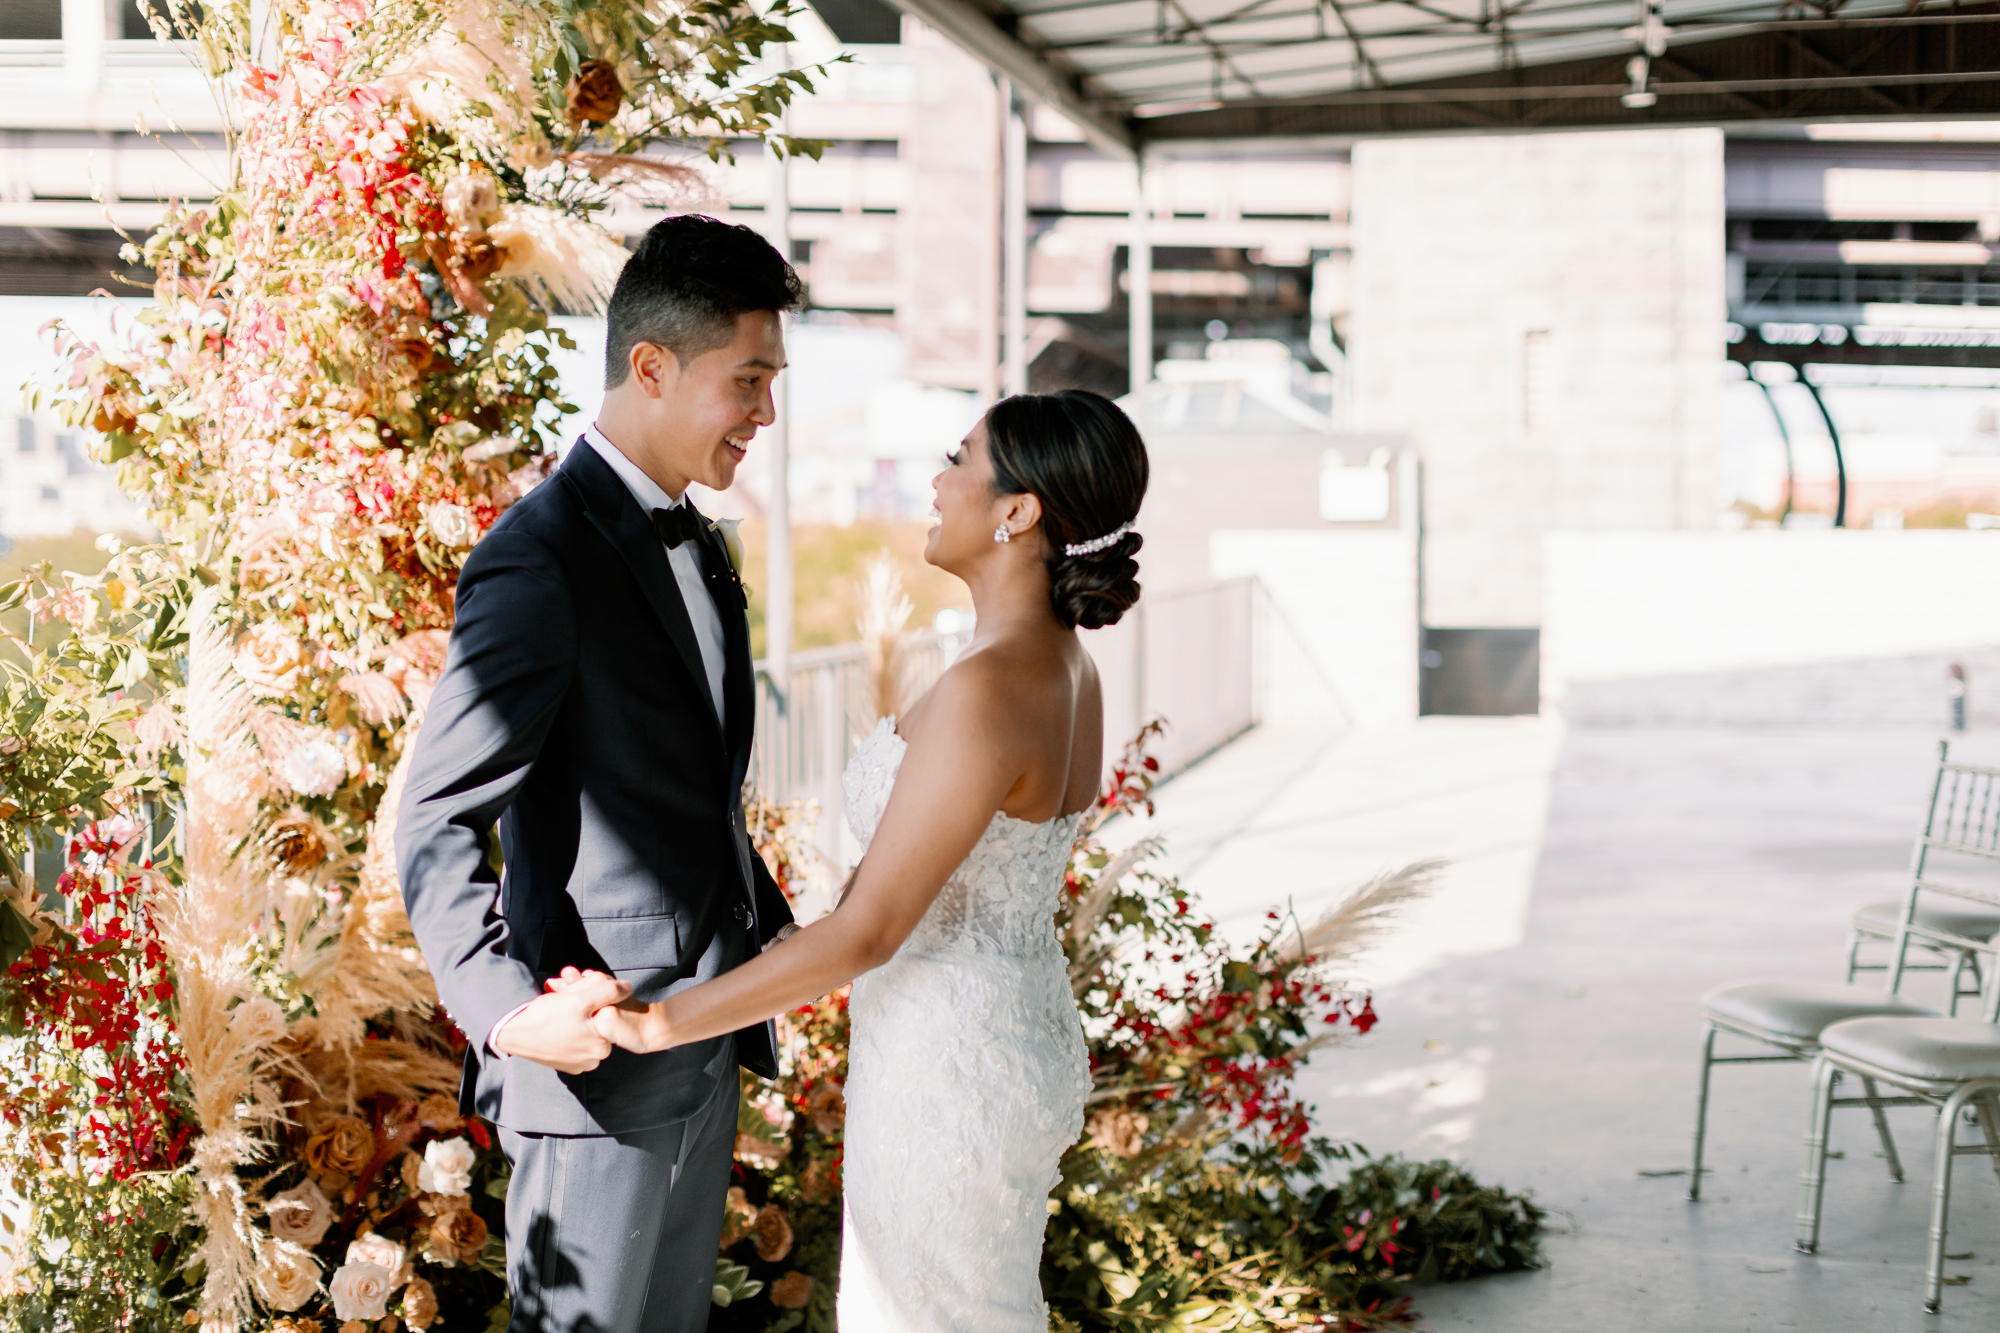 Ravel Hotel wedding with floral arch